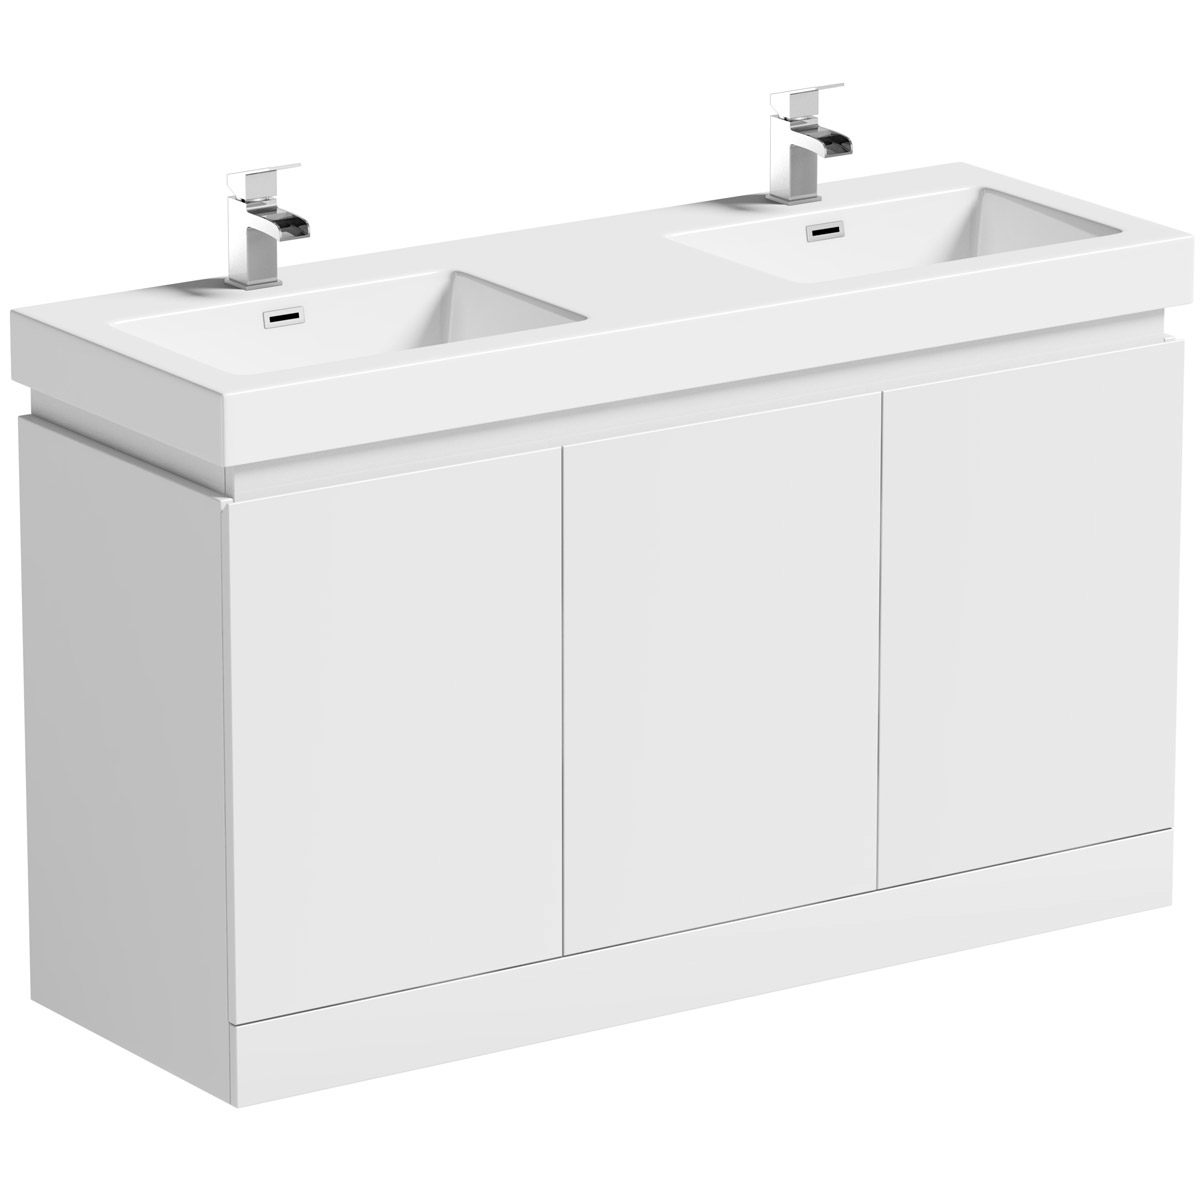 Mode Hardy White Floorstanding Double, Double Sink And Vanity Unit